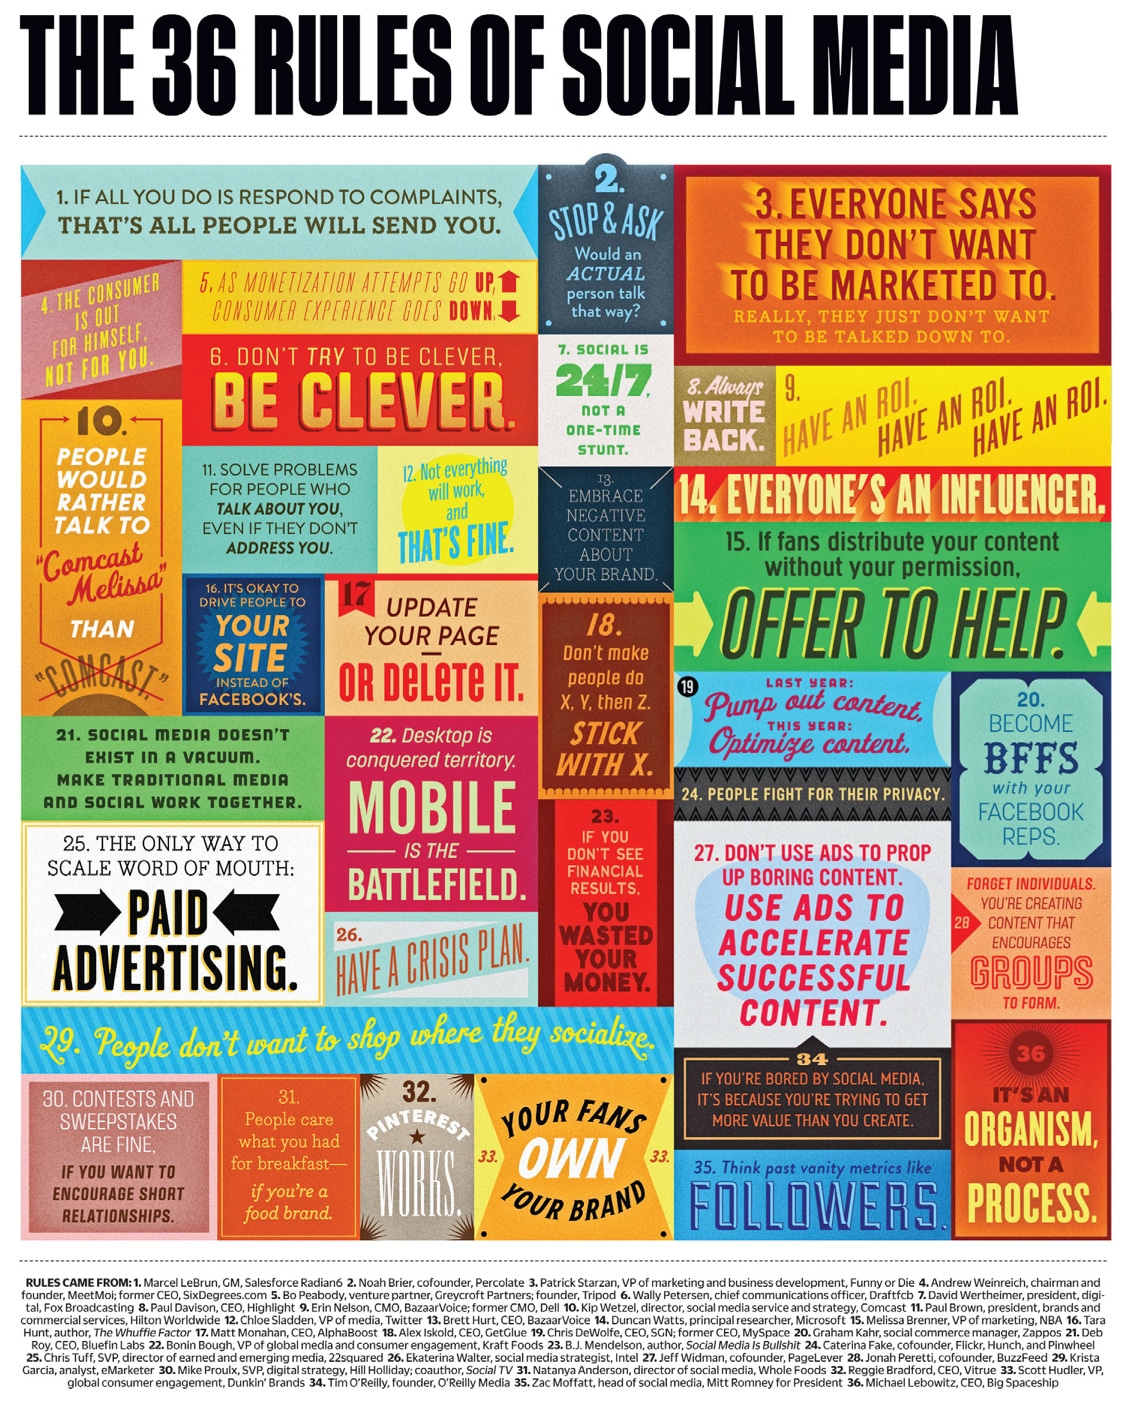 Rules-Social-Media-Plan-Infographic